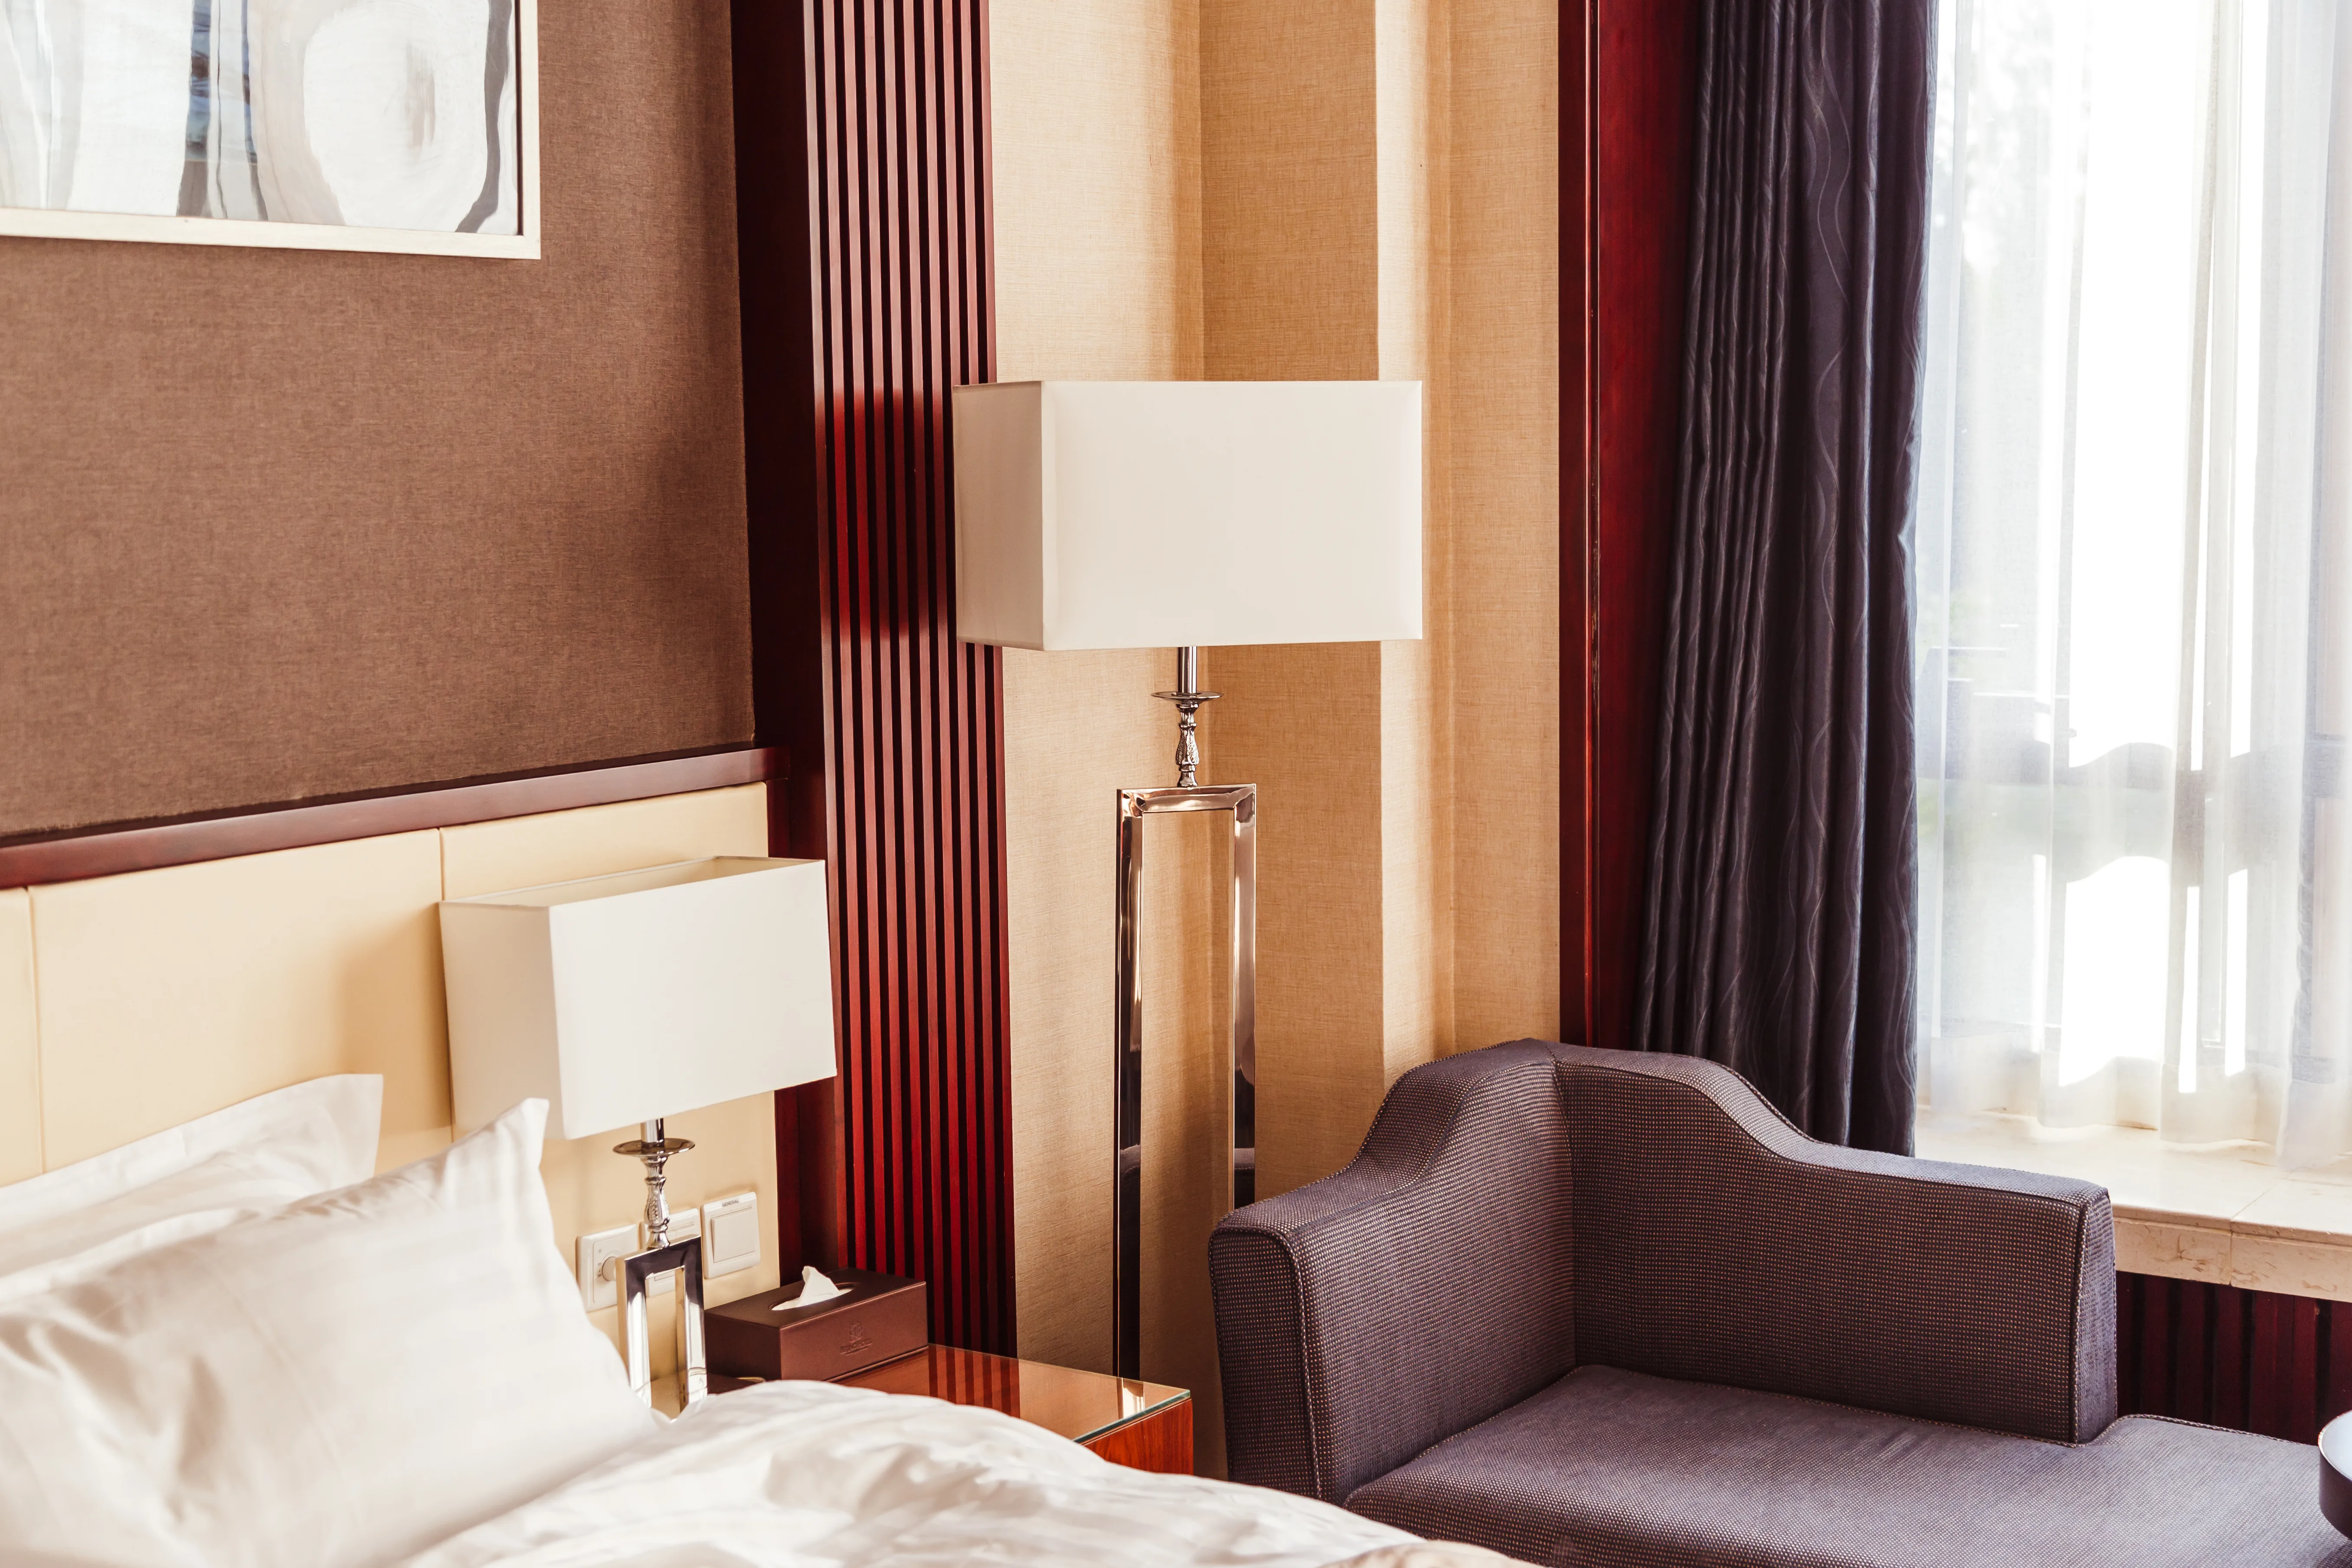 Jazz Up Your Hotel Interiors With Custom Hospitality Millwork